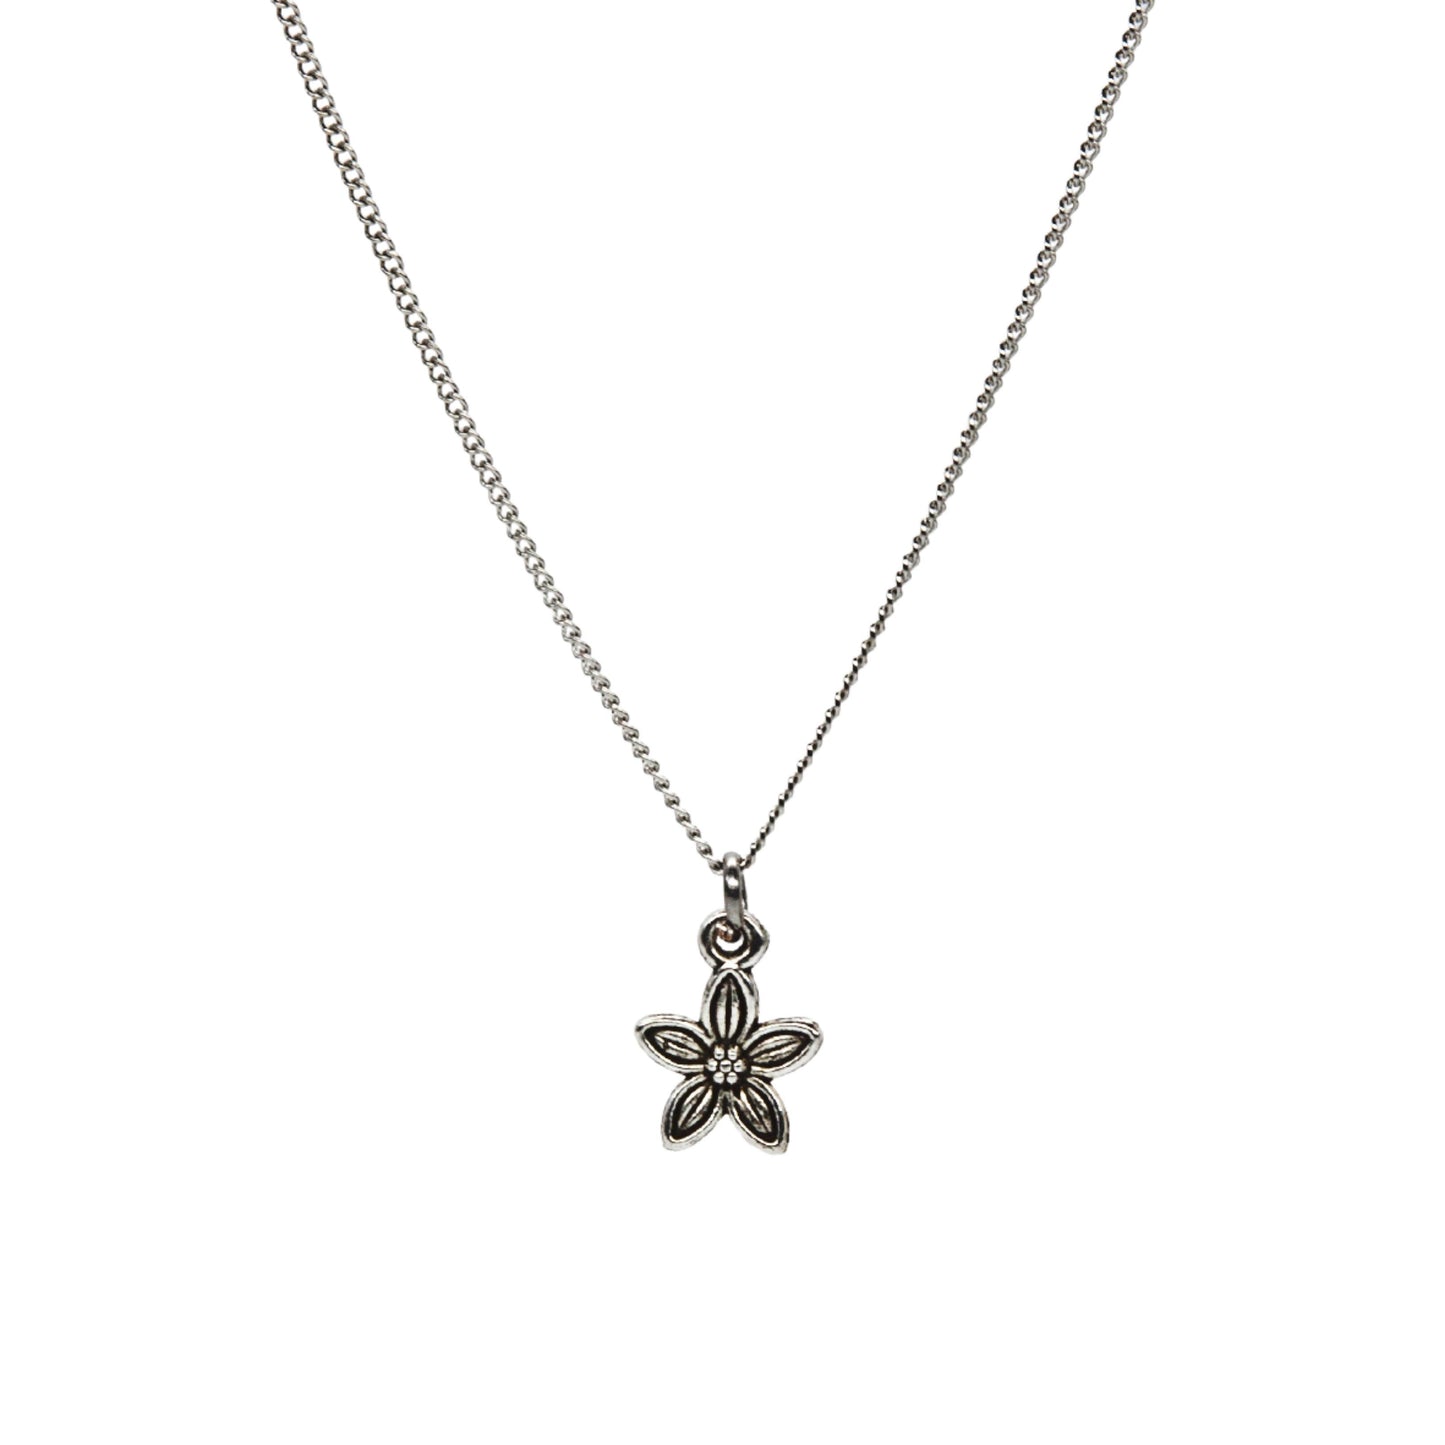 Silver Small Flower Necklace - Adjustable Length